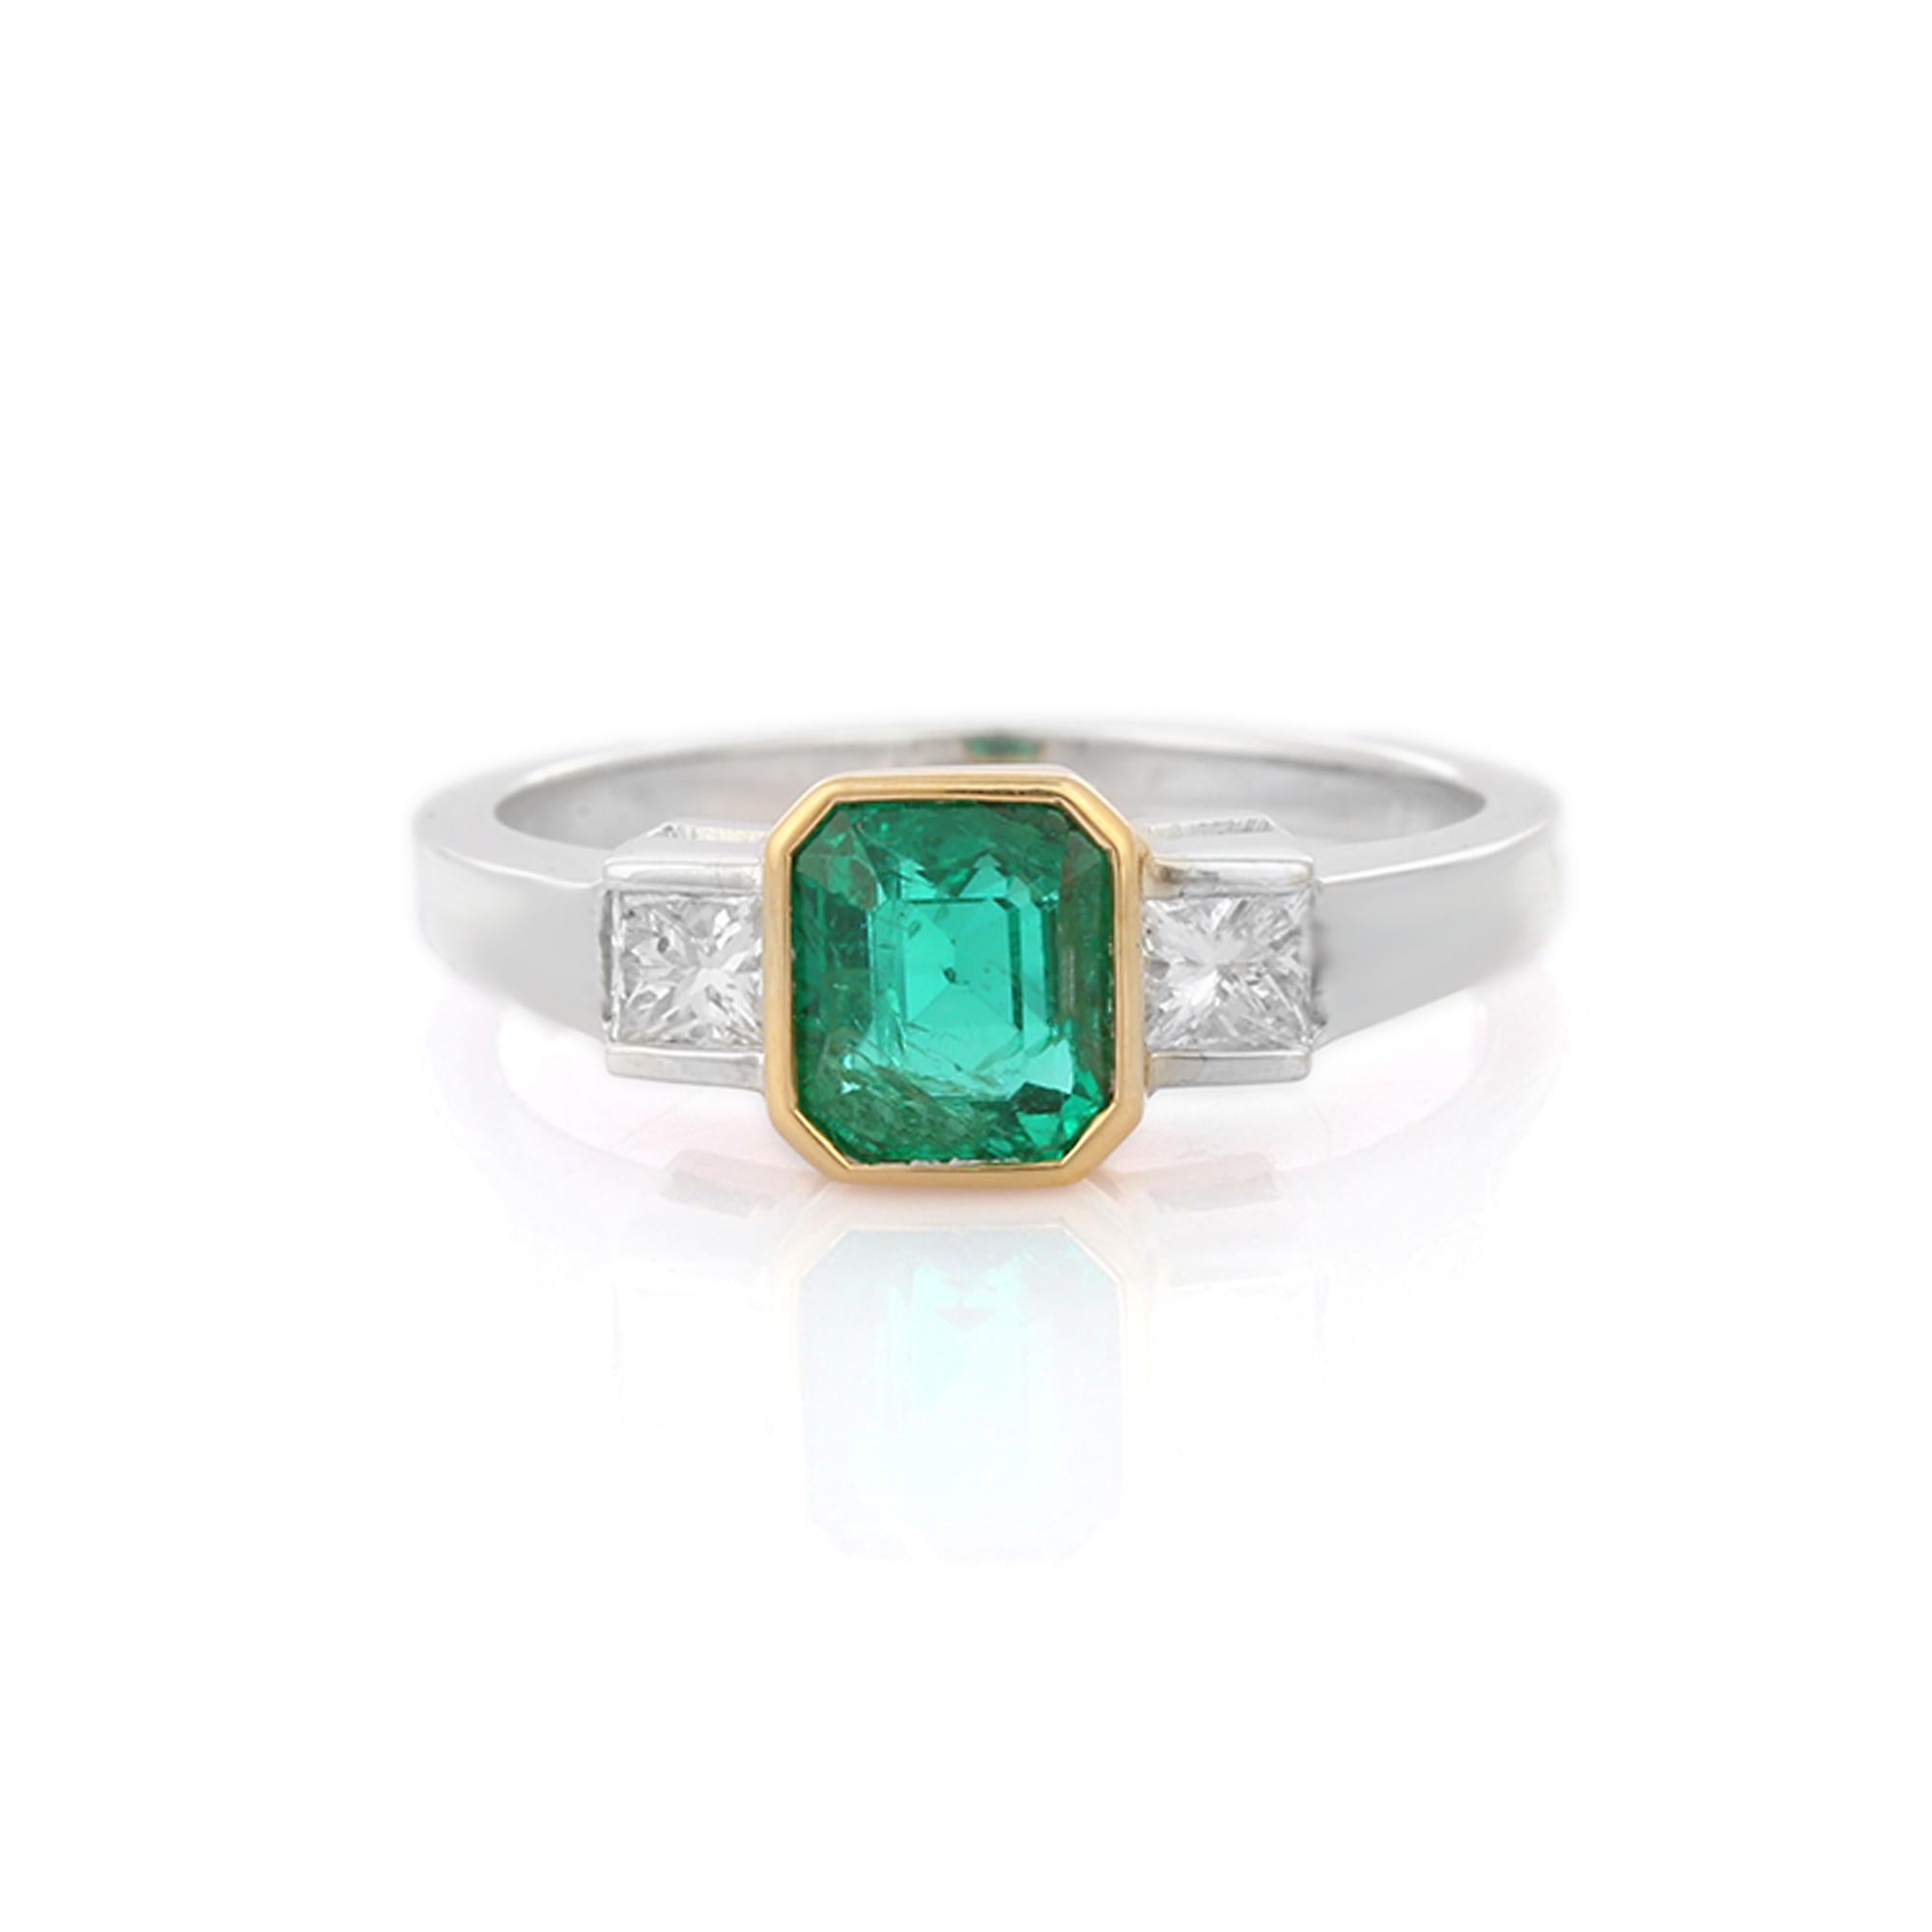 For Sale:  1.61 Carat Octagon Cut Emerald and Diamond Three Stone Ring in 18K White Gold 5